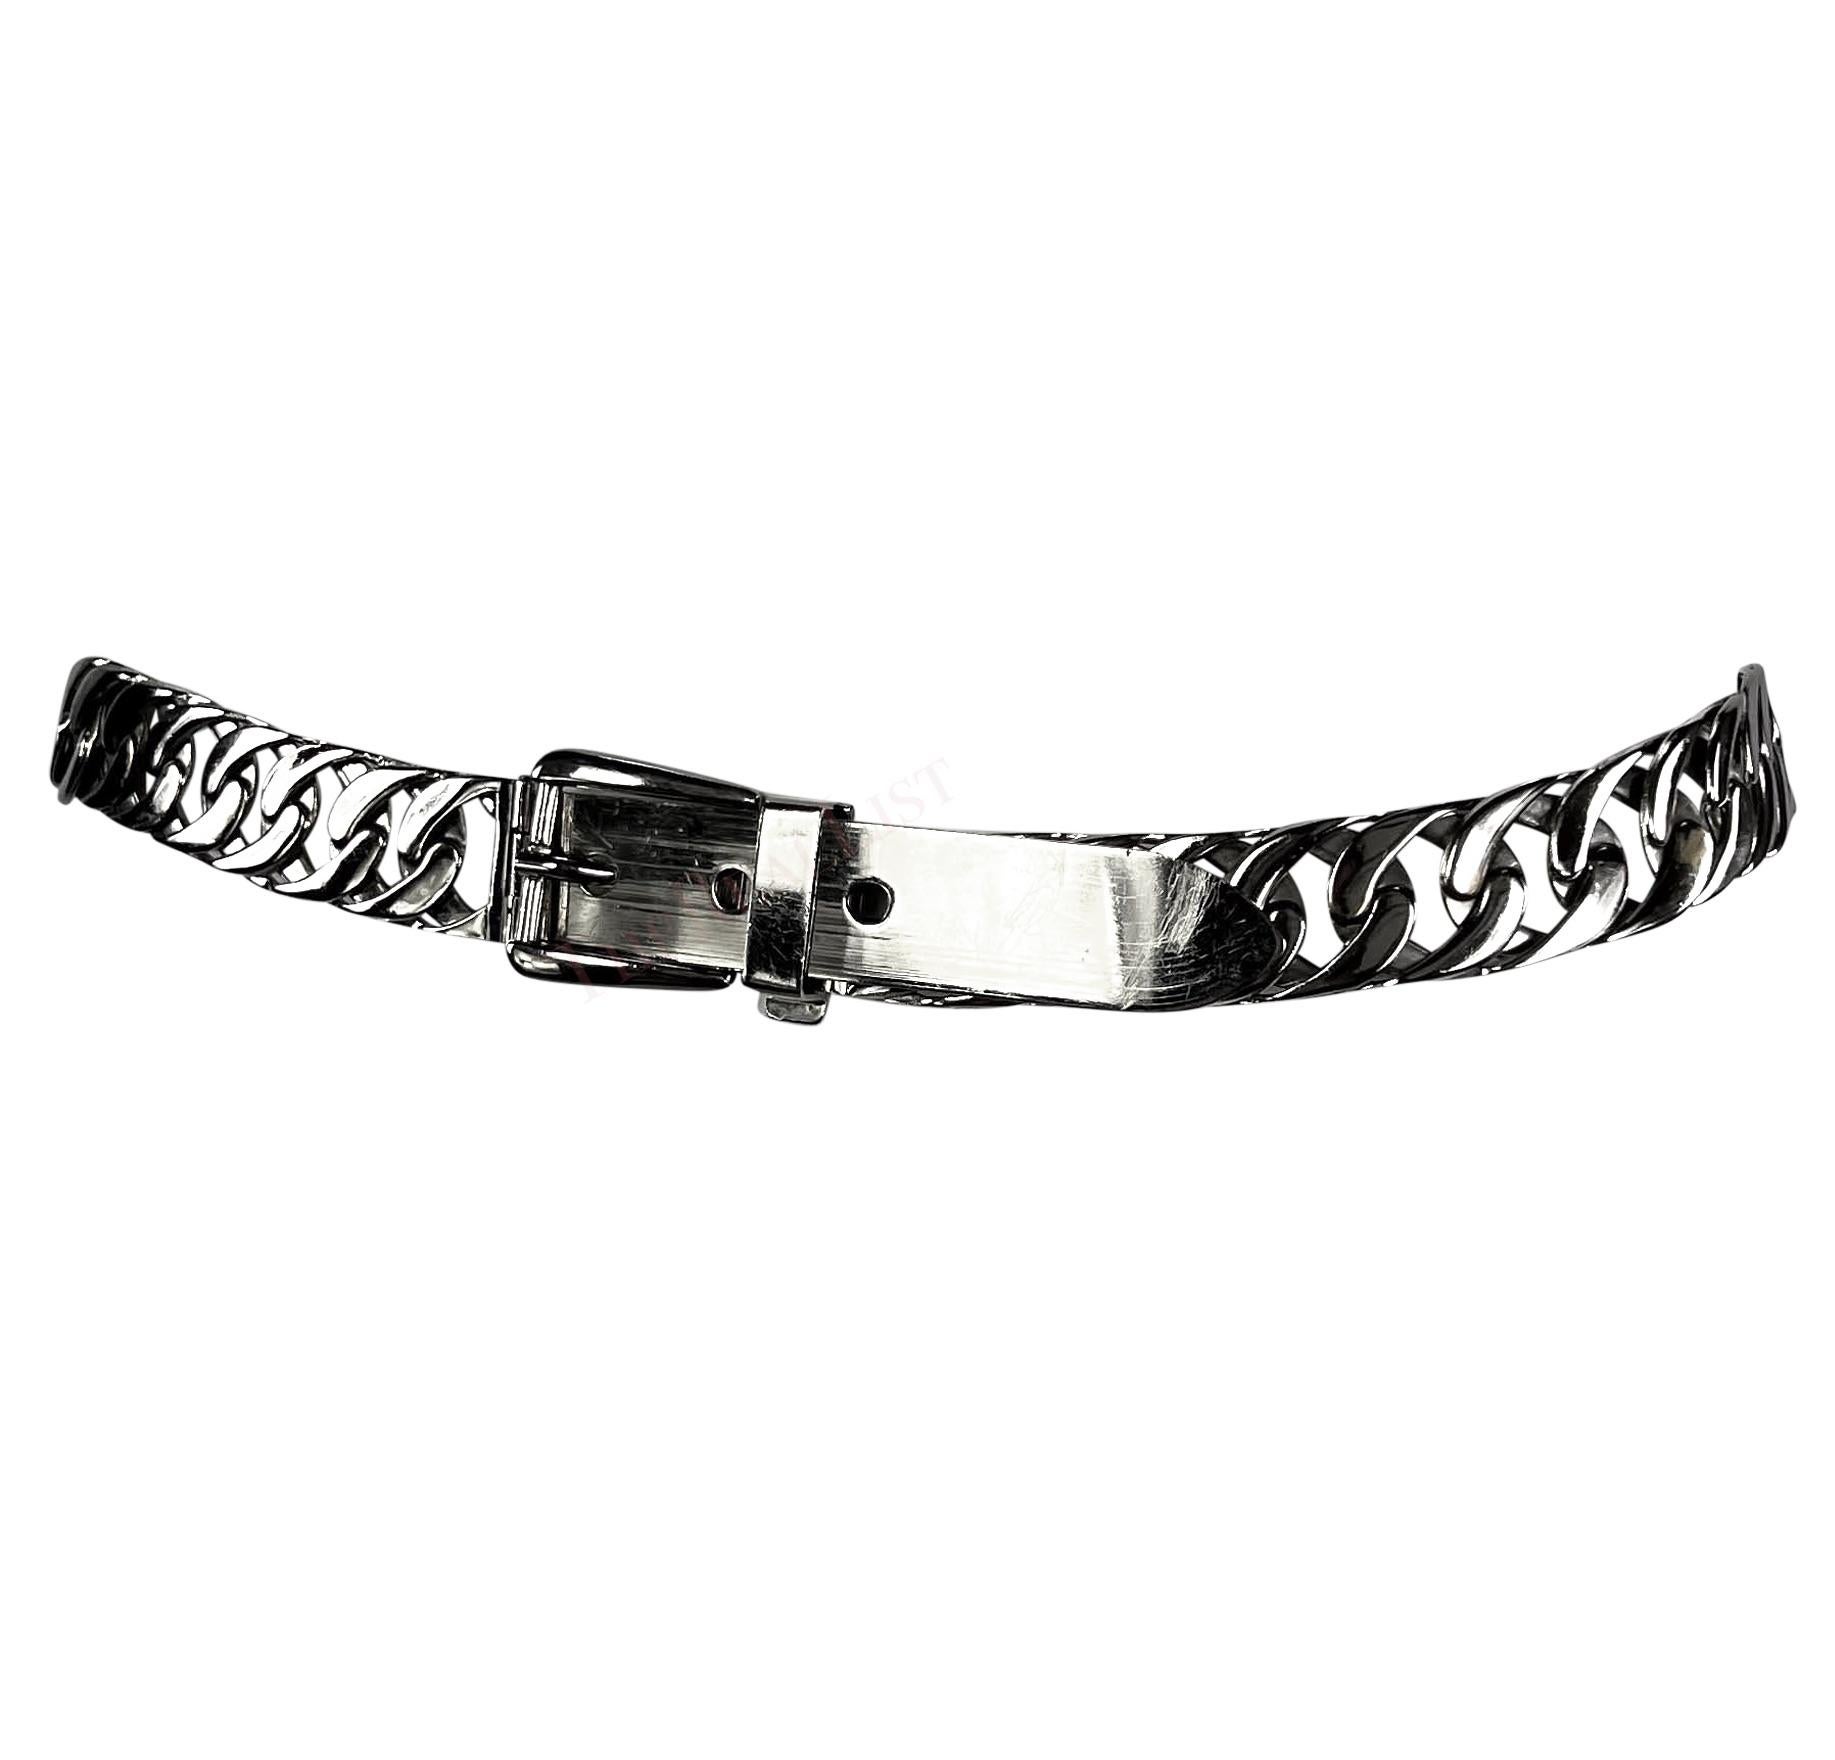 From the 1970s, this Gucci silver tone chain belt features a large chain link design and is adorned with a classic buckle closure. 

Approximate Measurements: 
Size - not listed
Width: 1